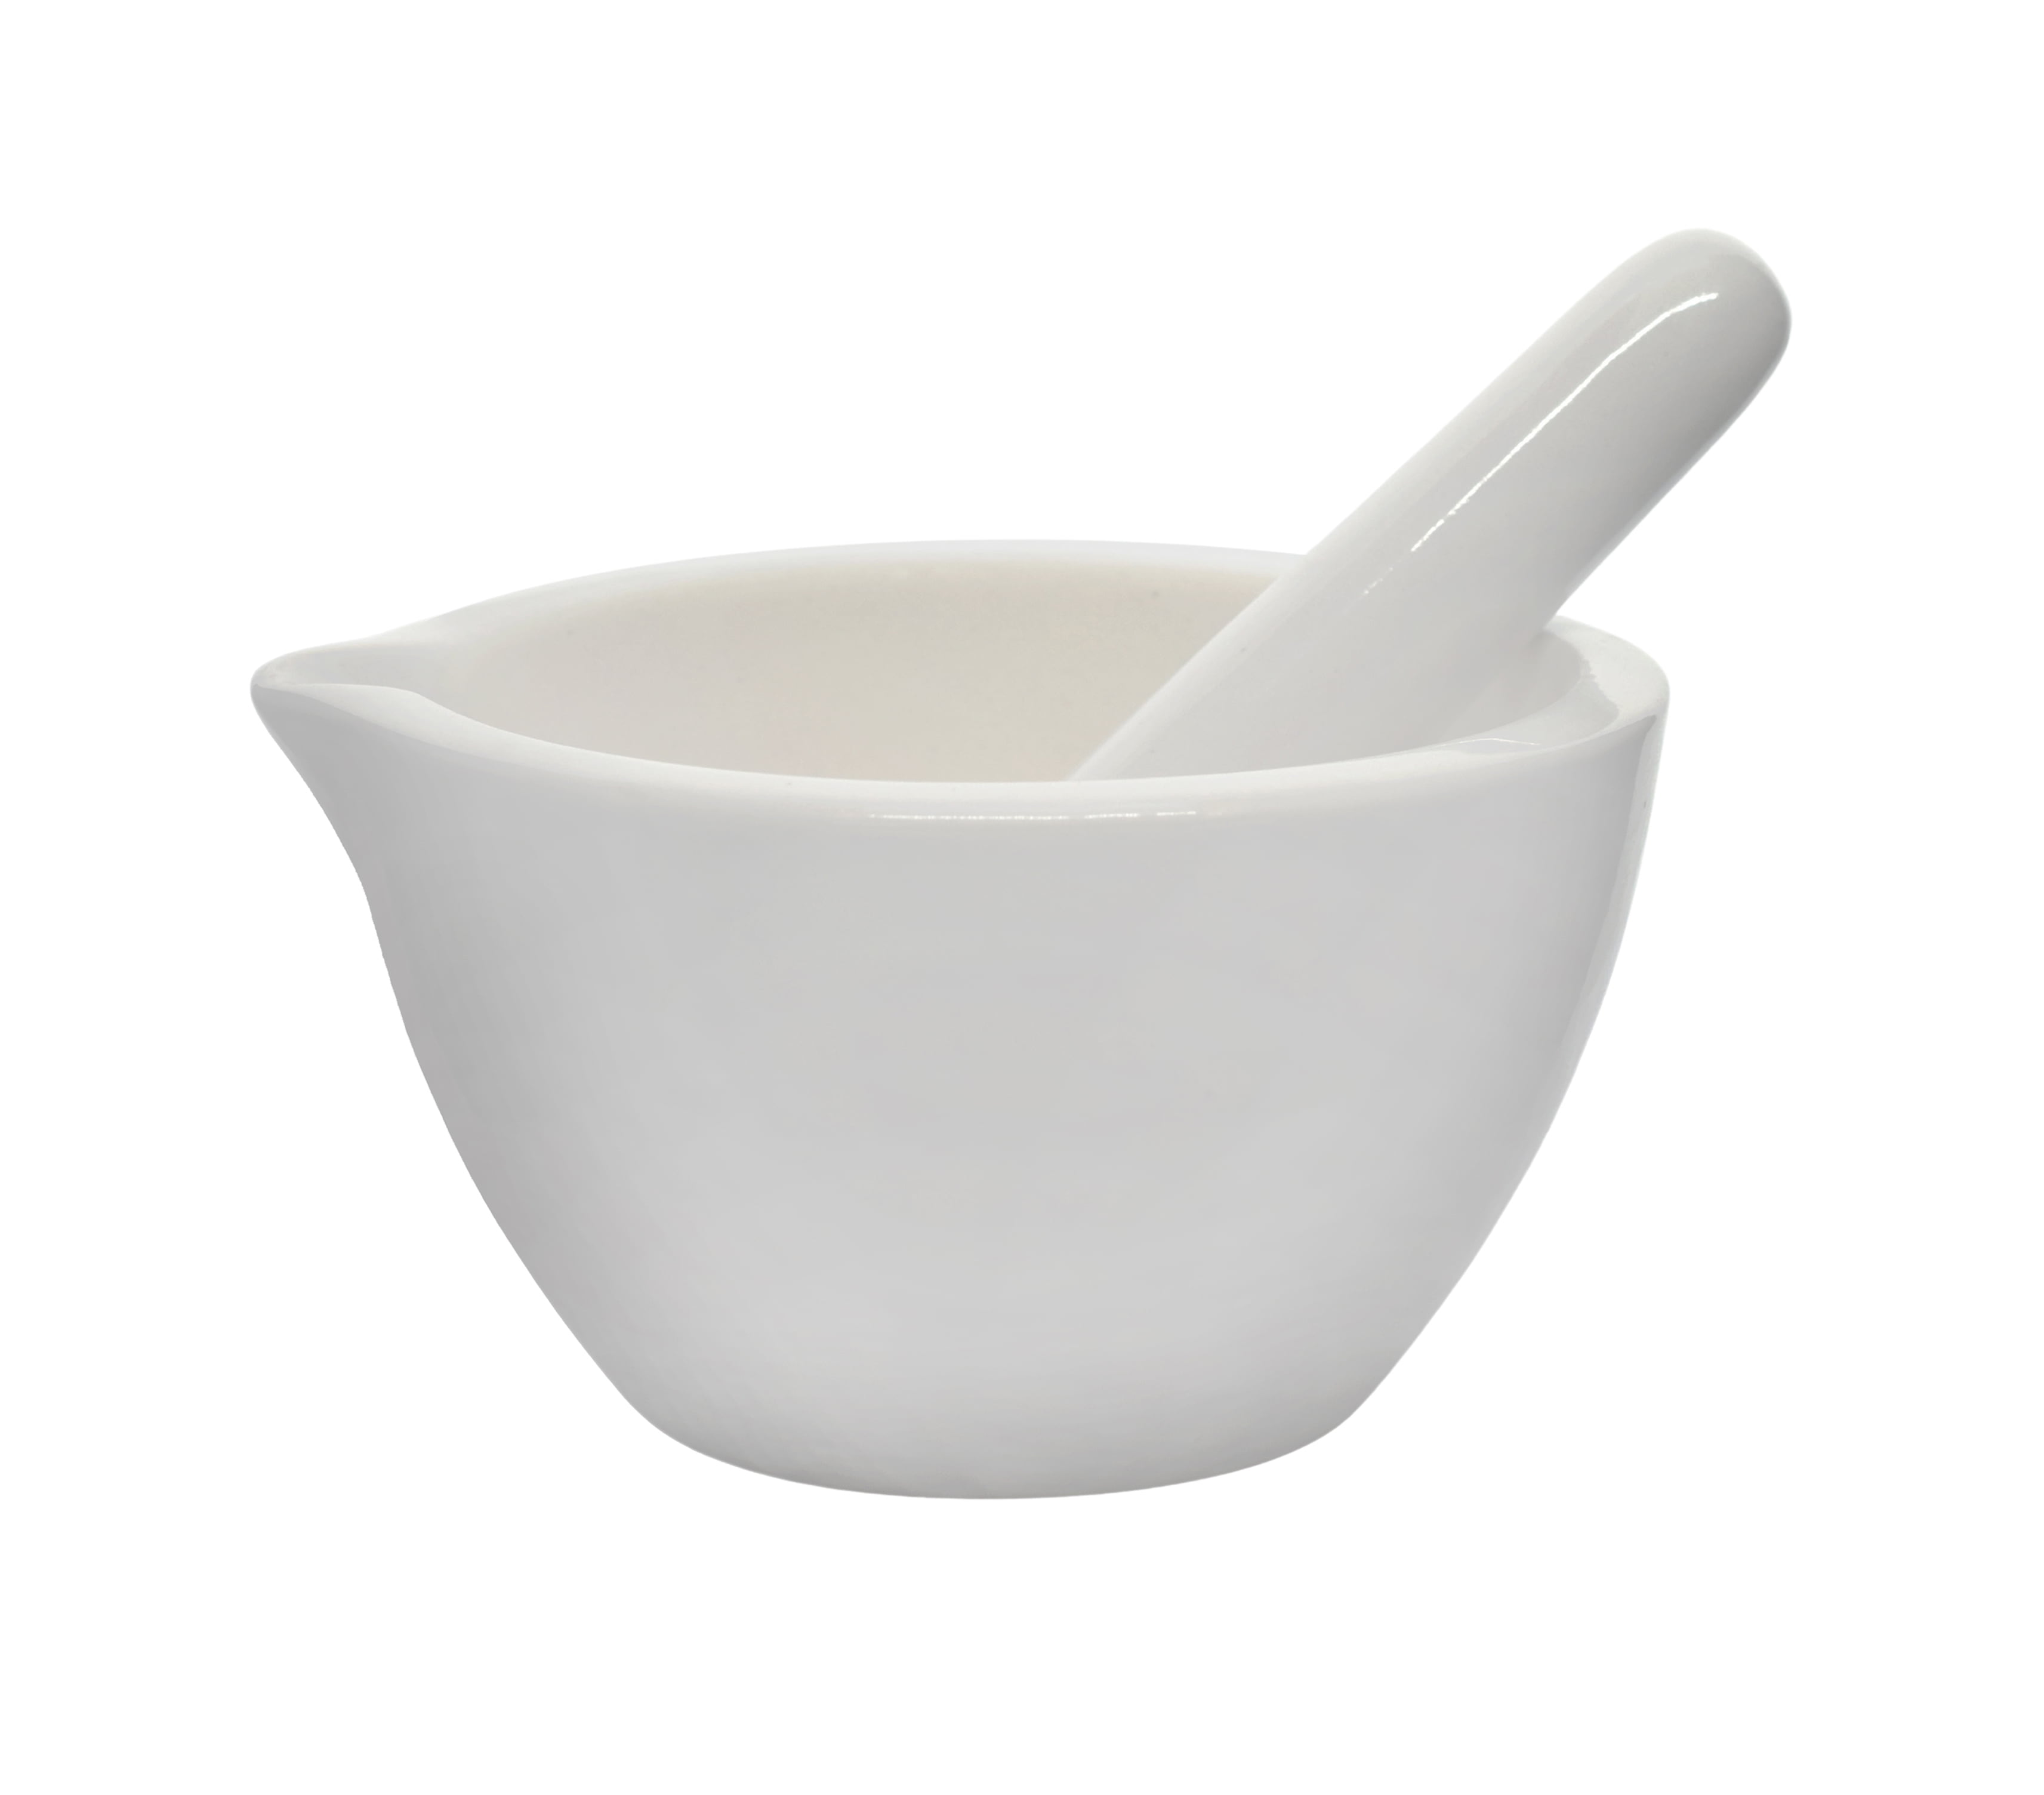 Mortar And Pestle Classic Stone White Pestal Natural Set To Grind Food Porcelain 